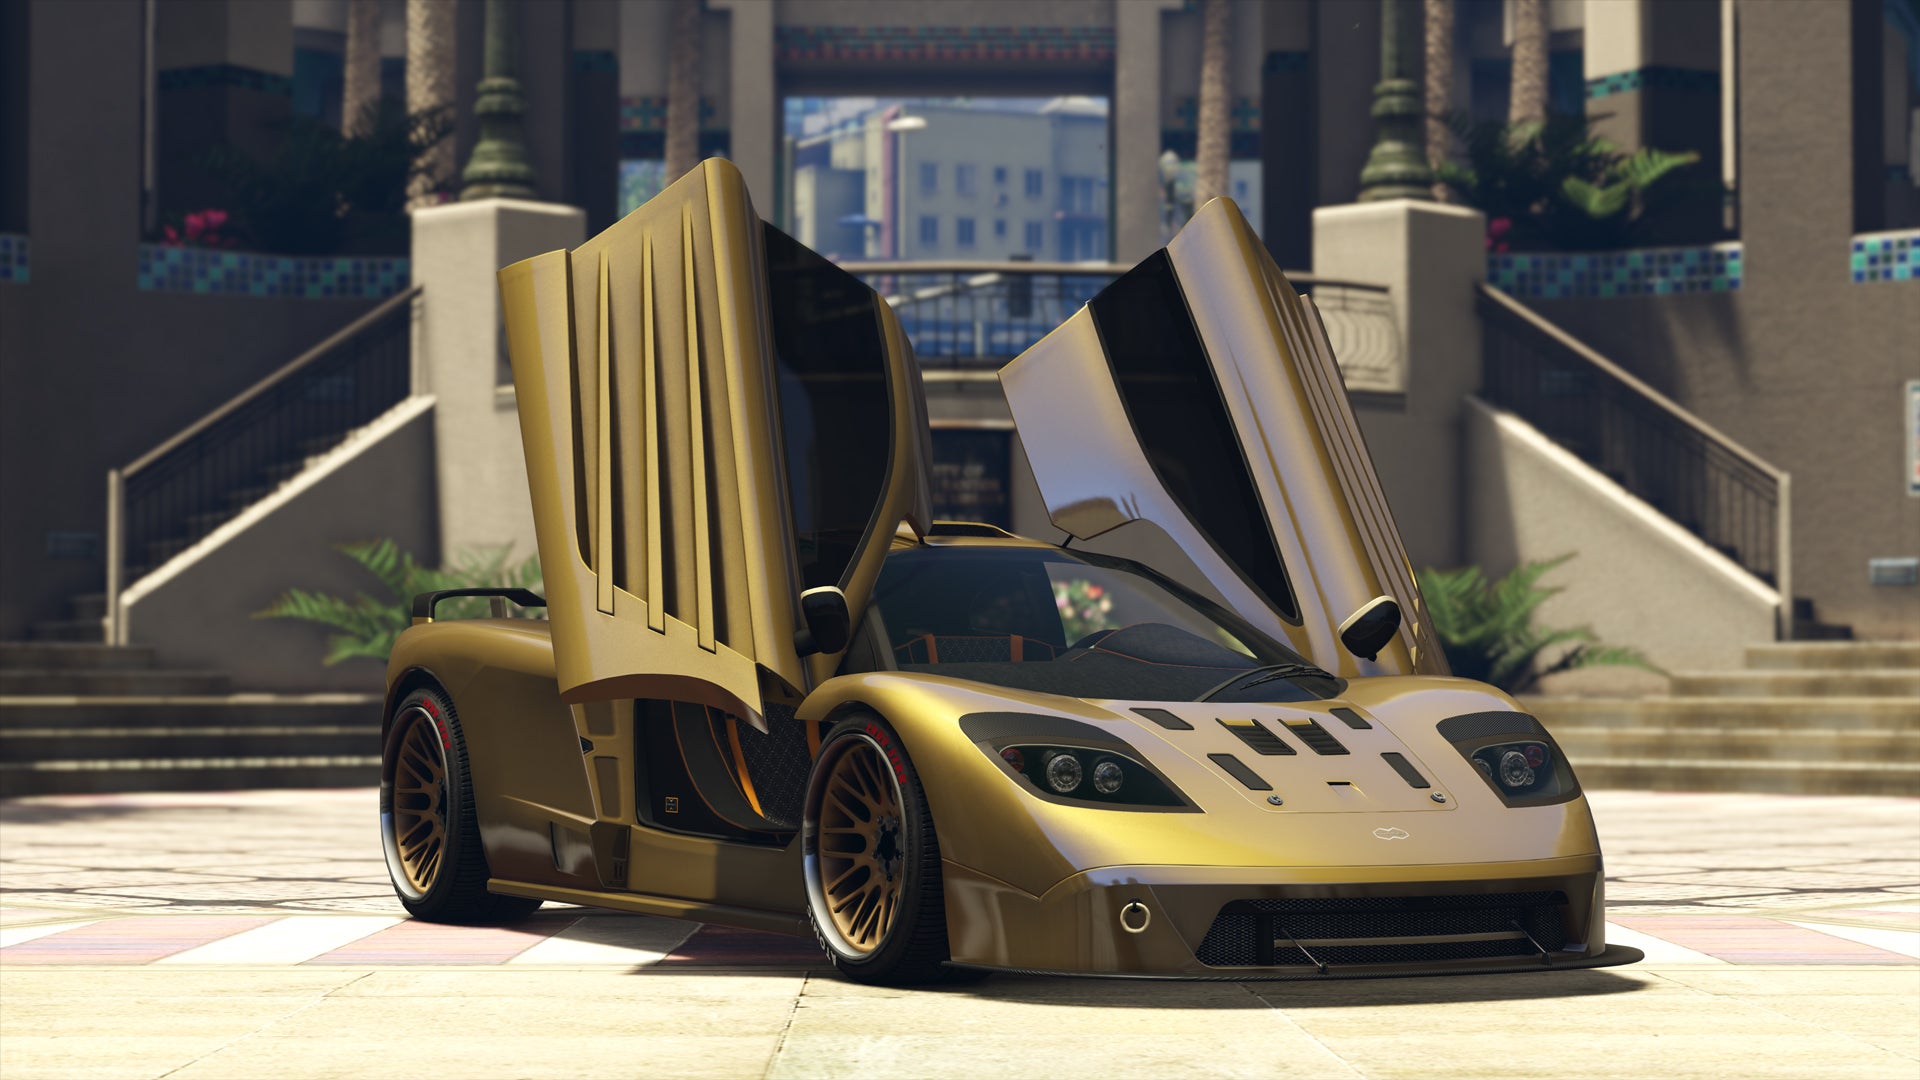 GTA Online Special Vehicle Races and the Progen GP1 supercar coming March 14 VG247